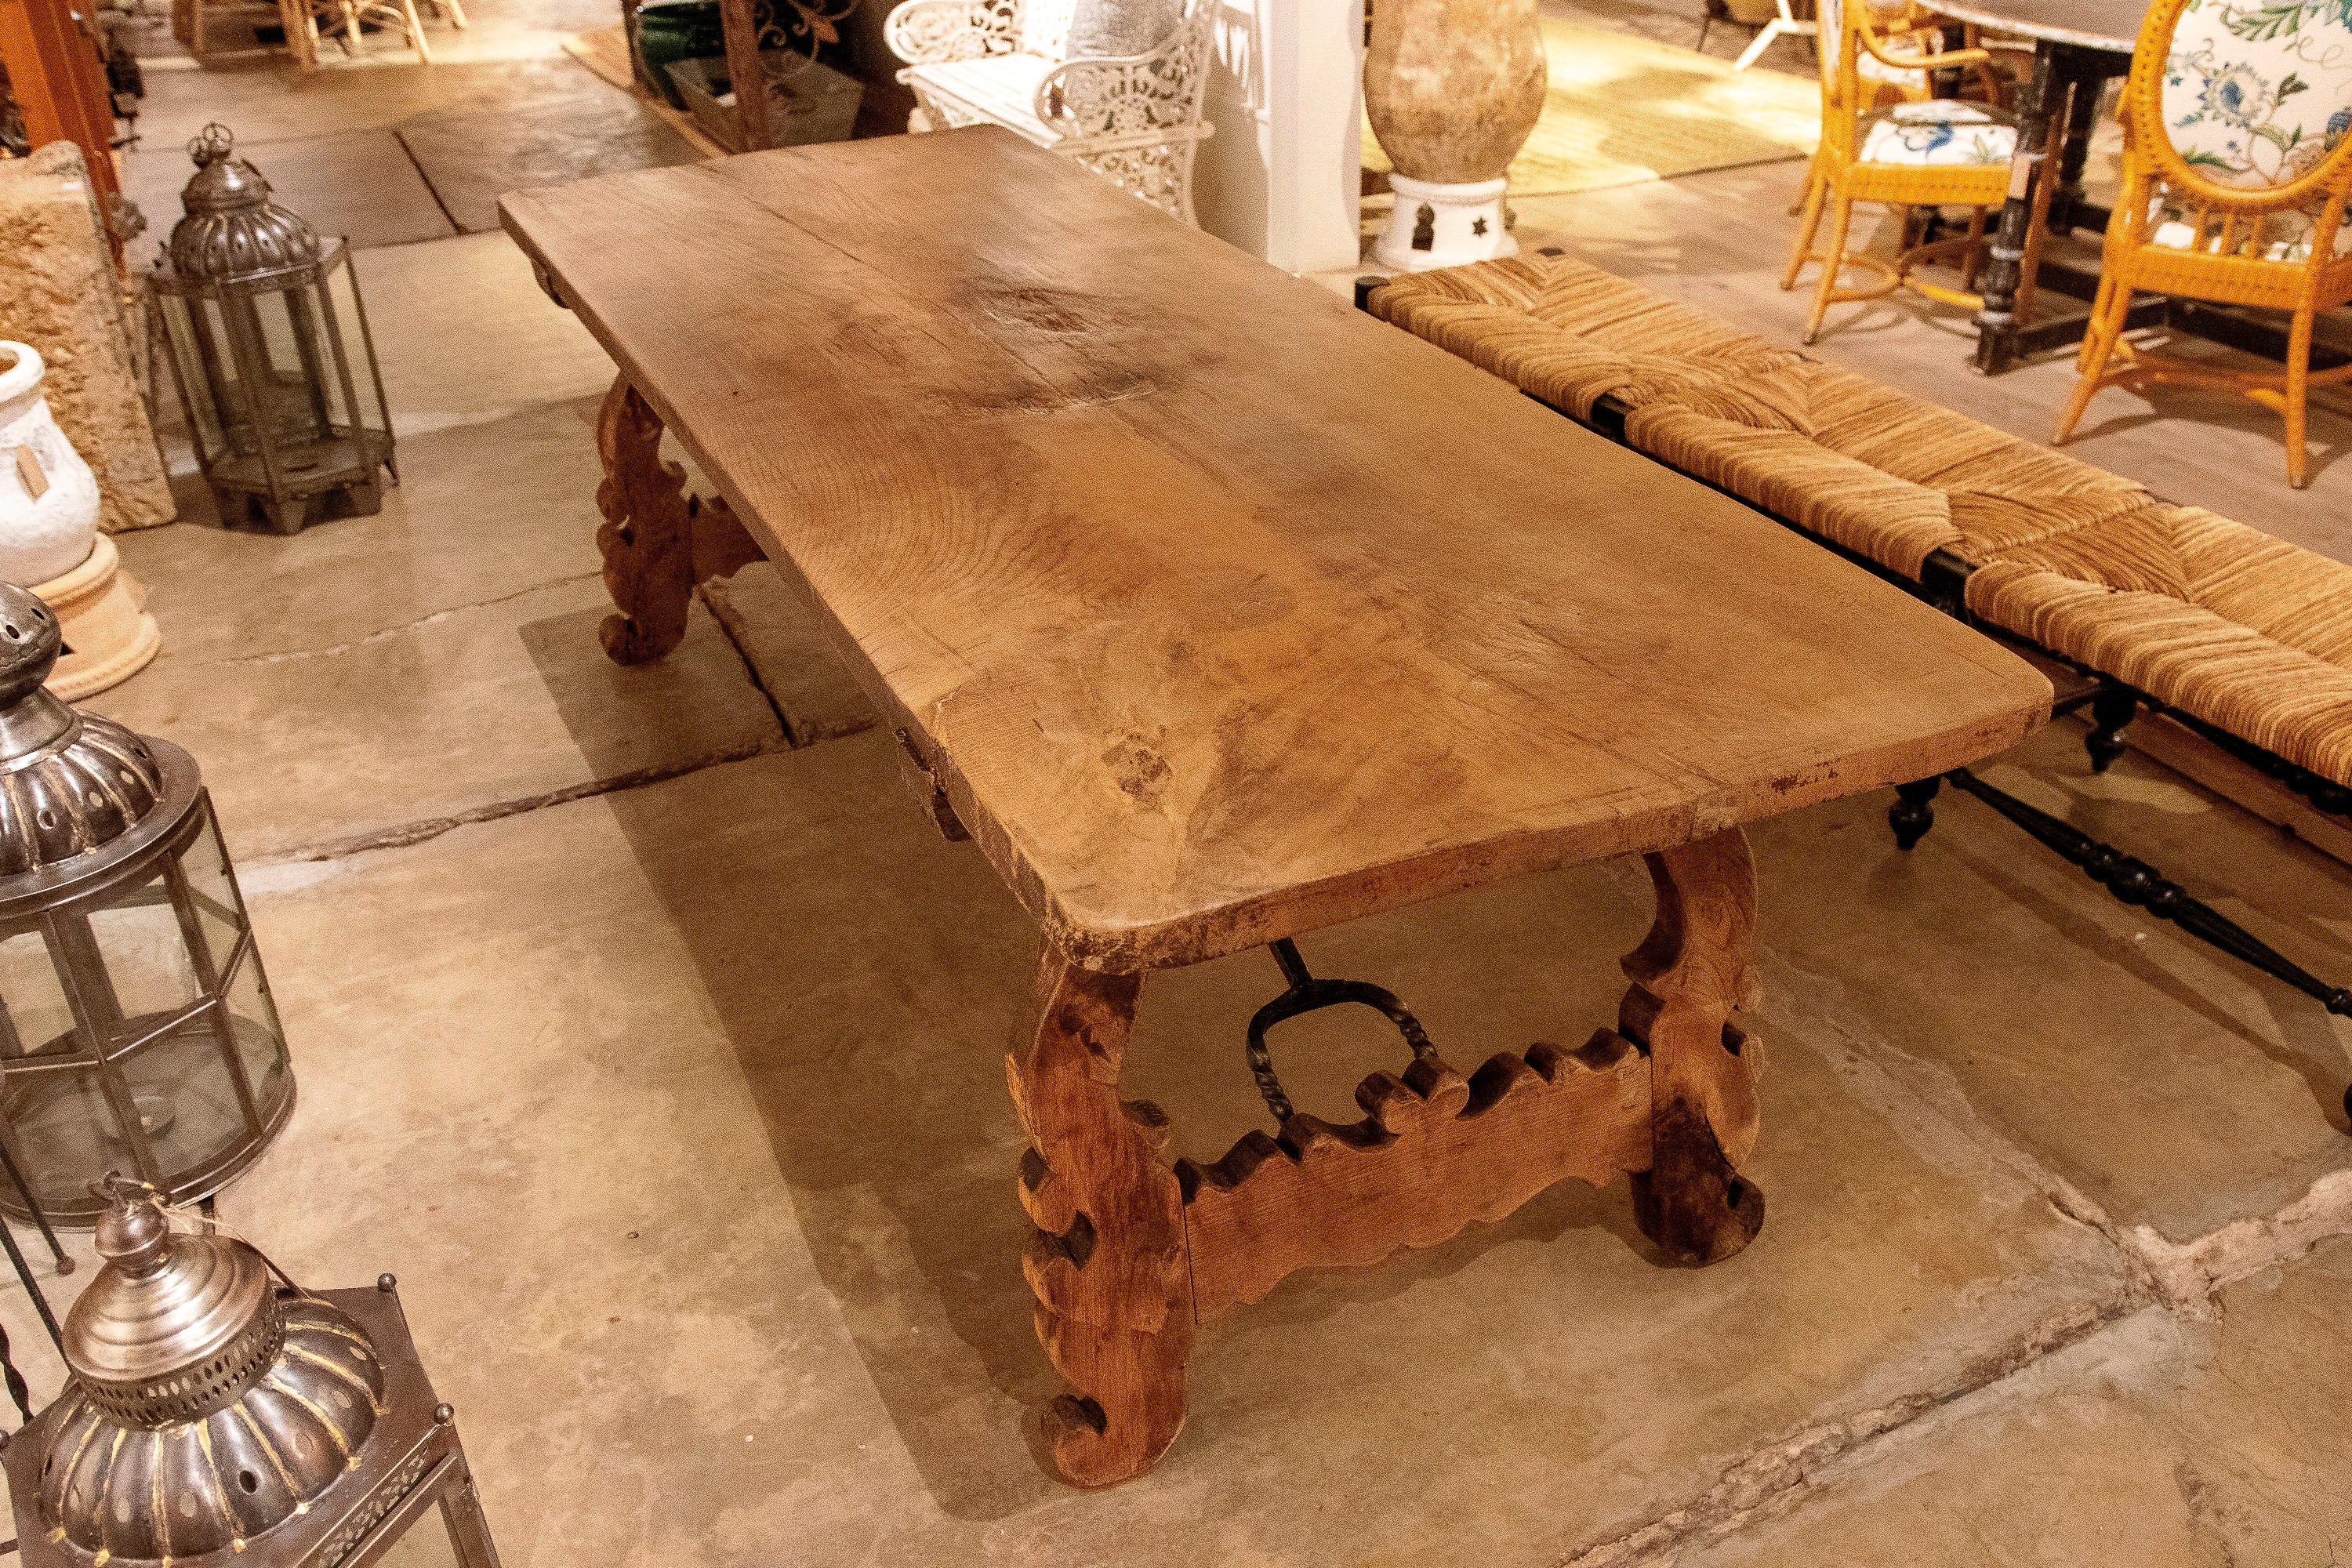 Spanish Large Wooden Table with Hand-Carved Legs and Original Iron Fittings For Sale 11